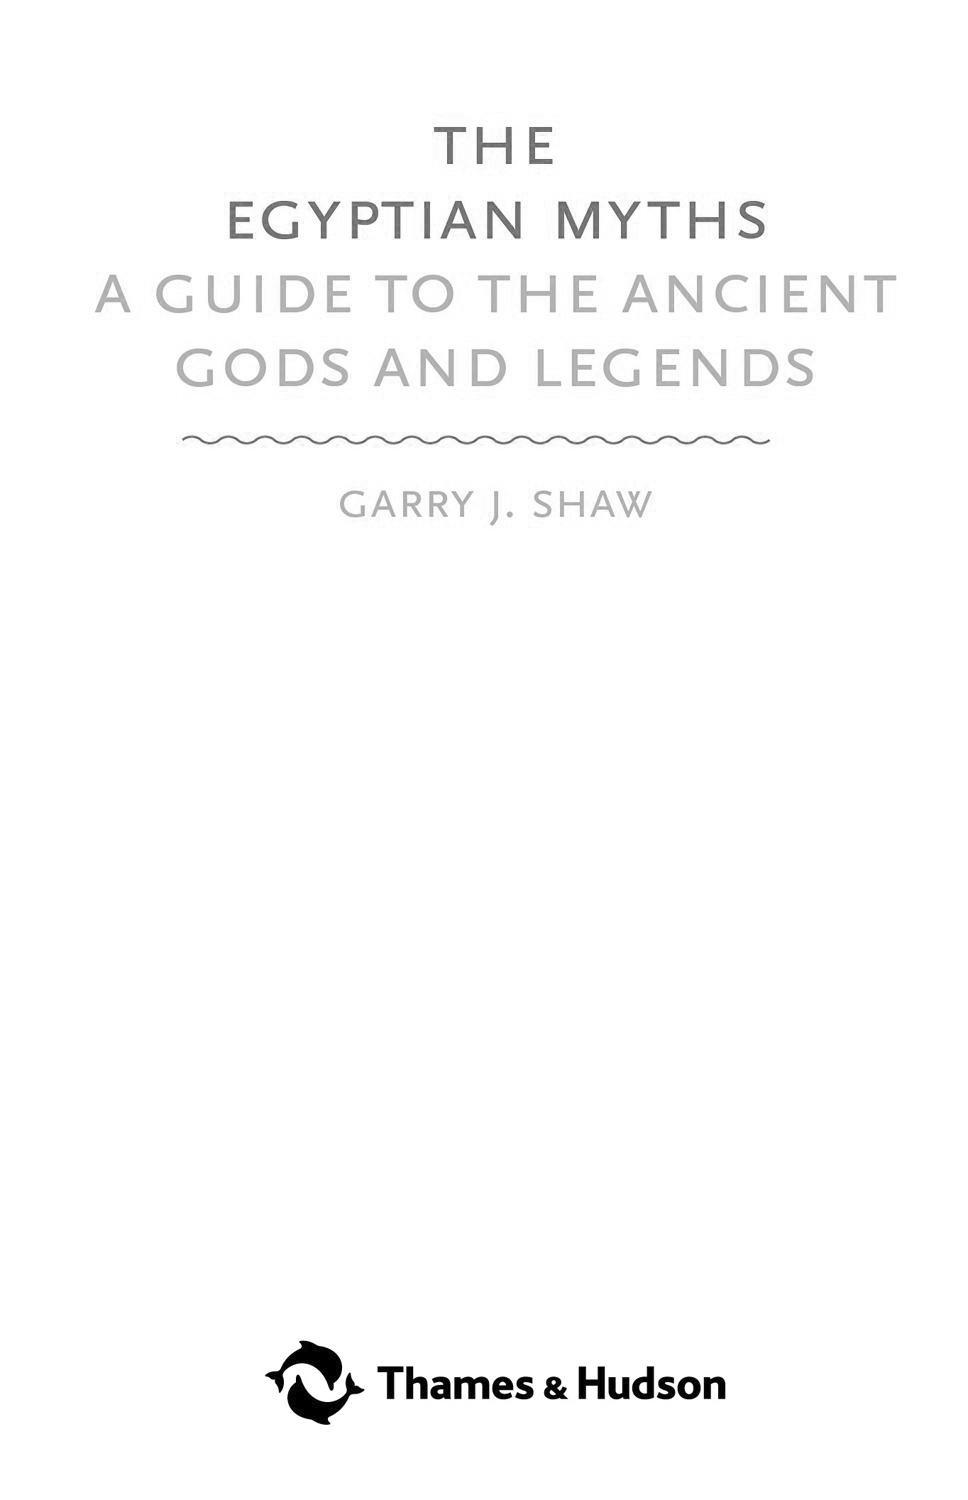 Garry J Shaw has a doctorate in Egyptology from the University of Liverpool - photo 2